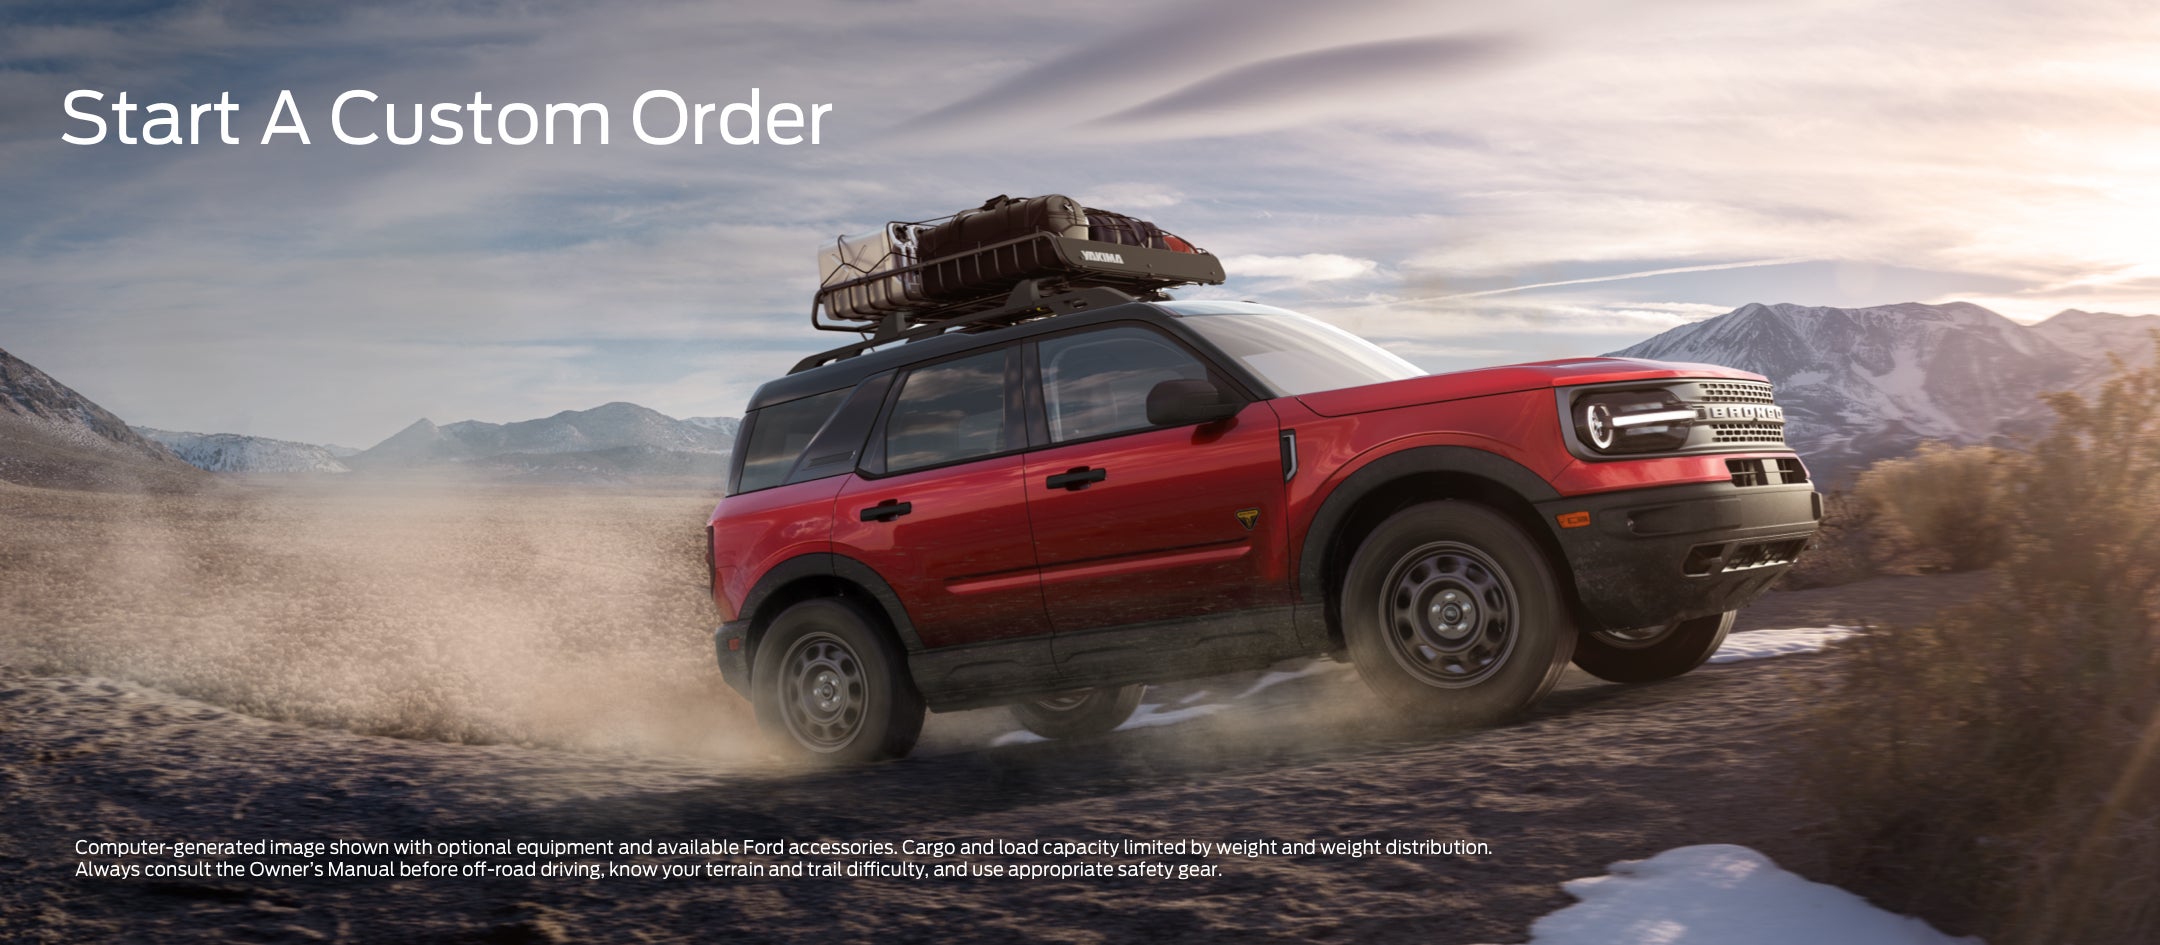 Start a custom order | Crossroads Ford Indian Trail in Indian Trail NC